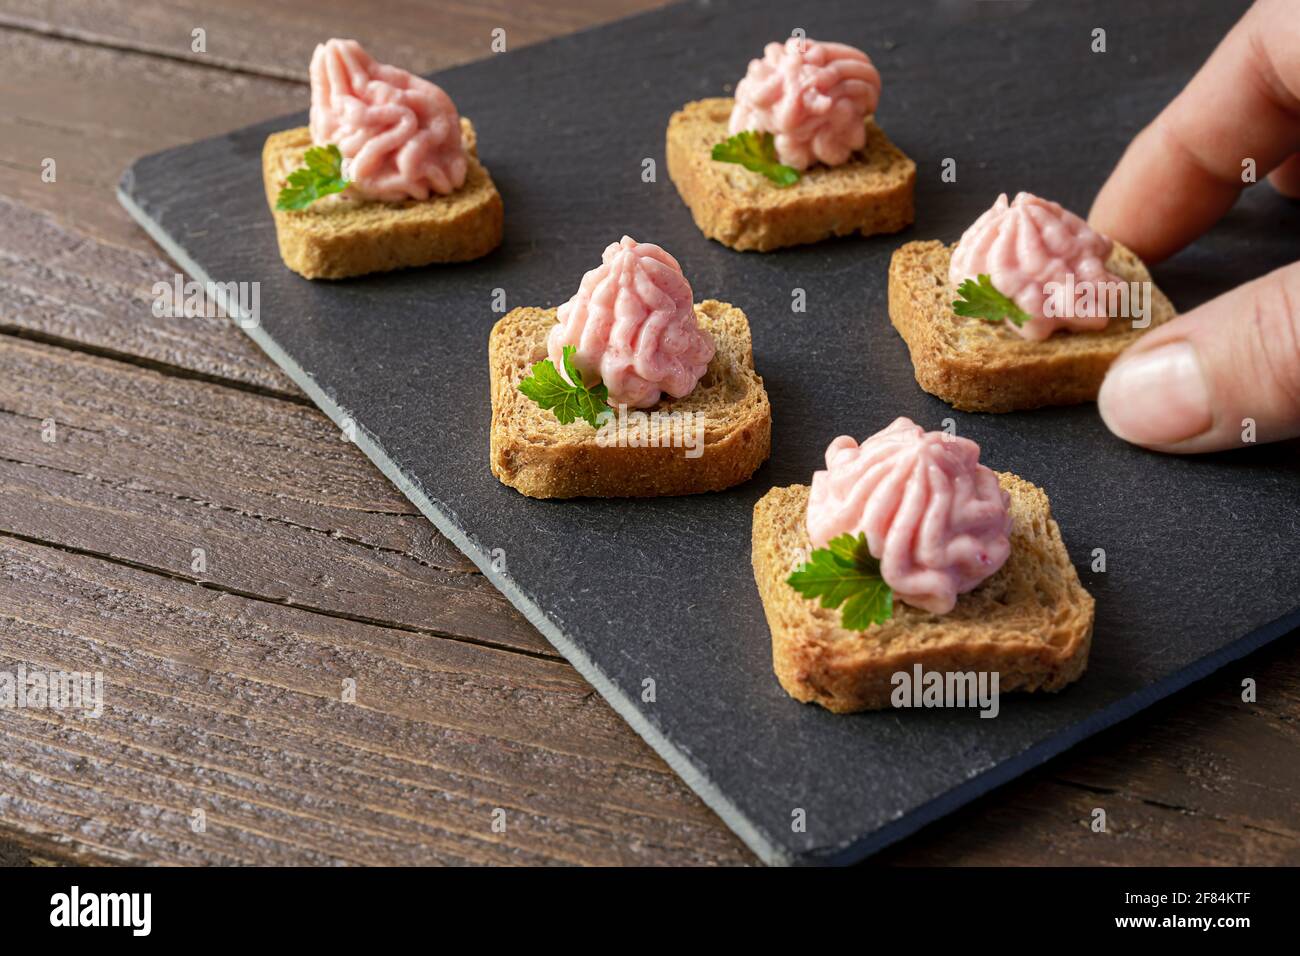 Hand takes crostini or canapes with taramasalata from a slate board Stock Photo